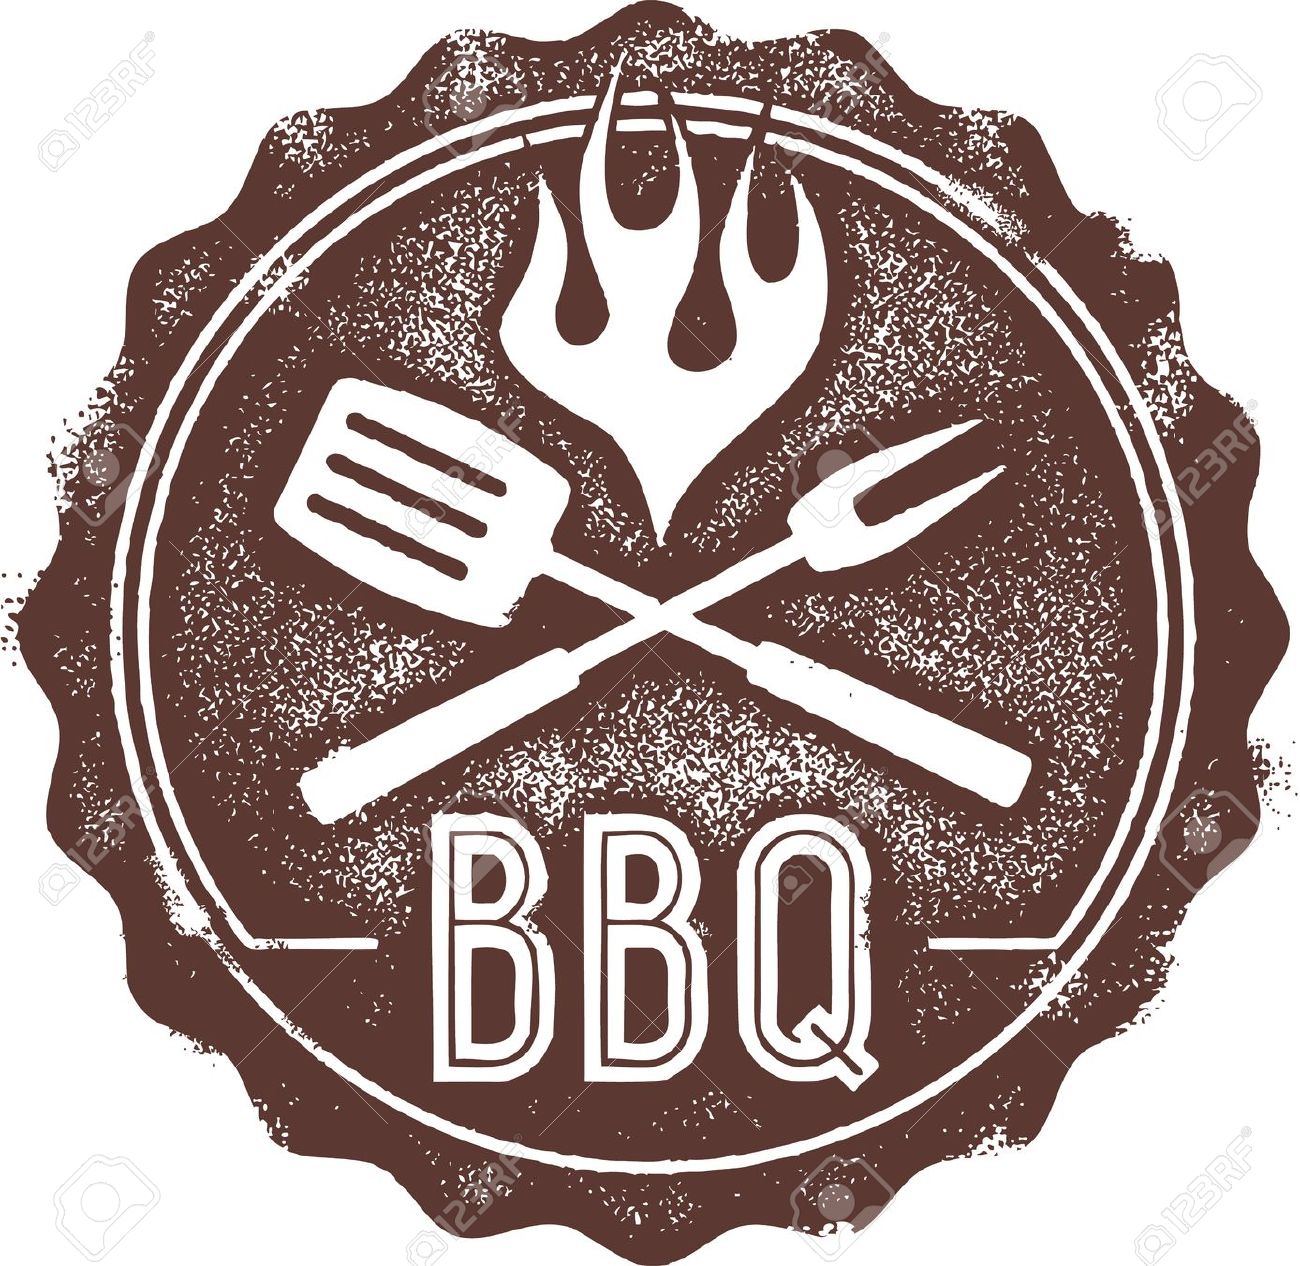 BBQ Clipart image